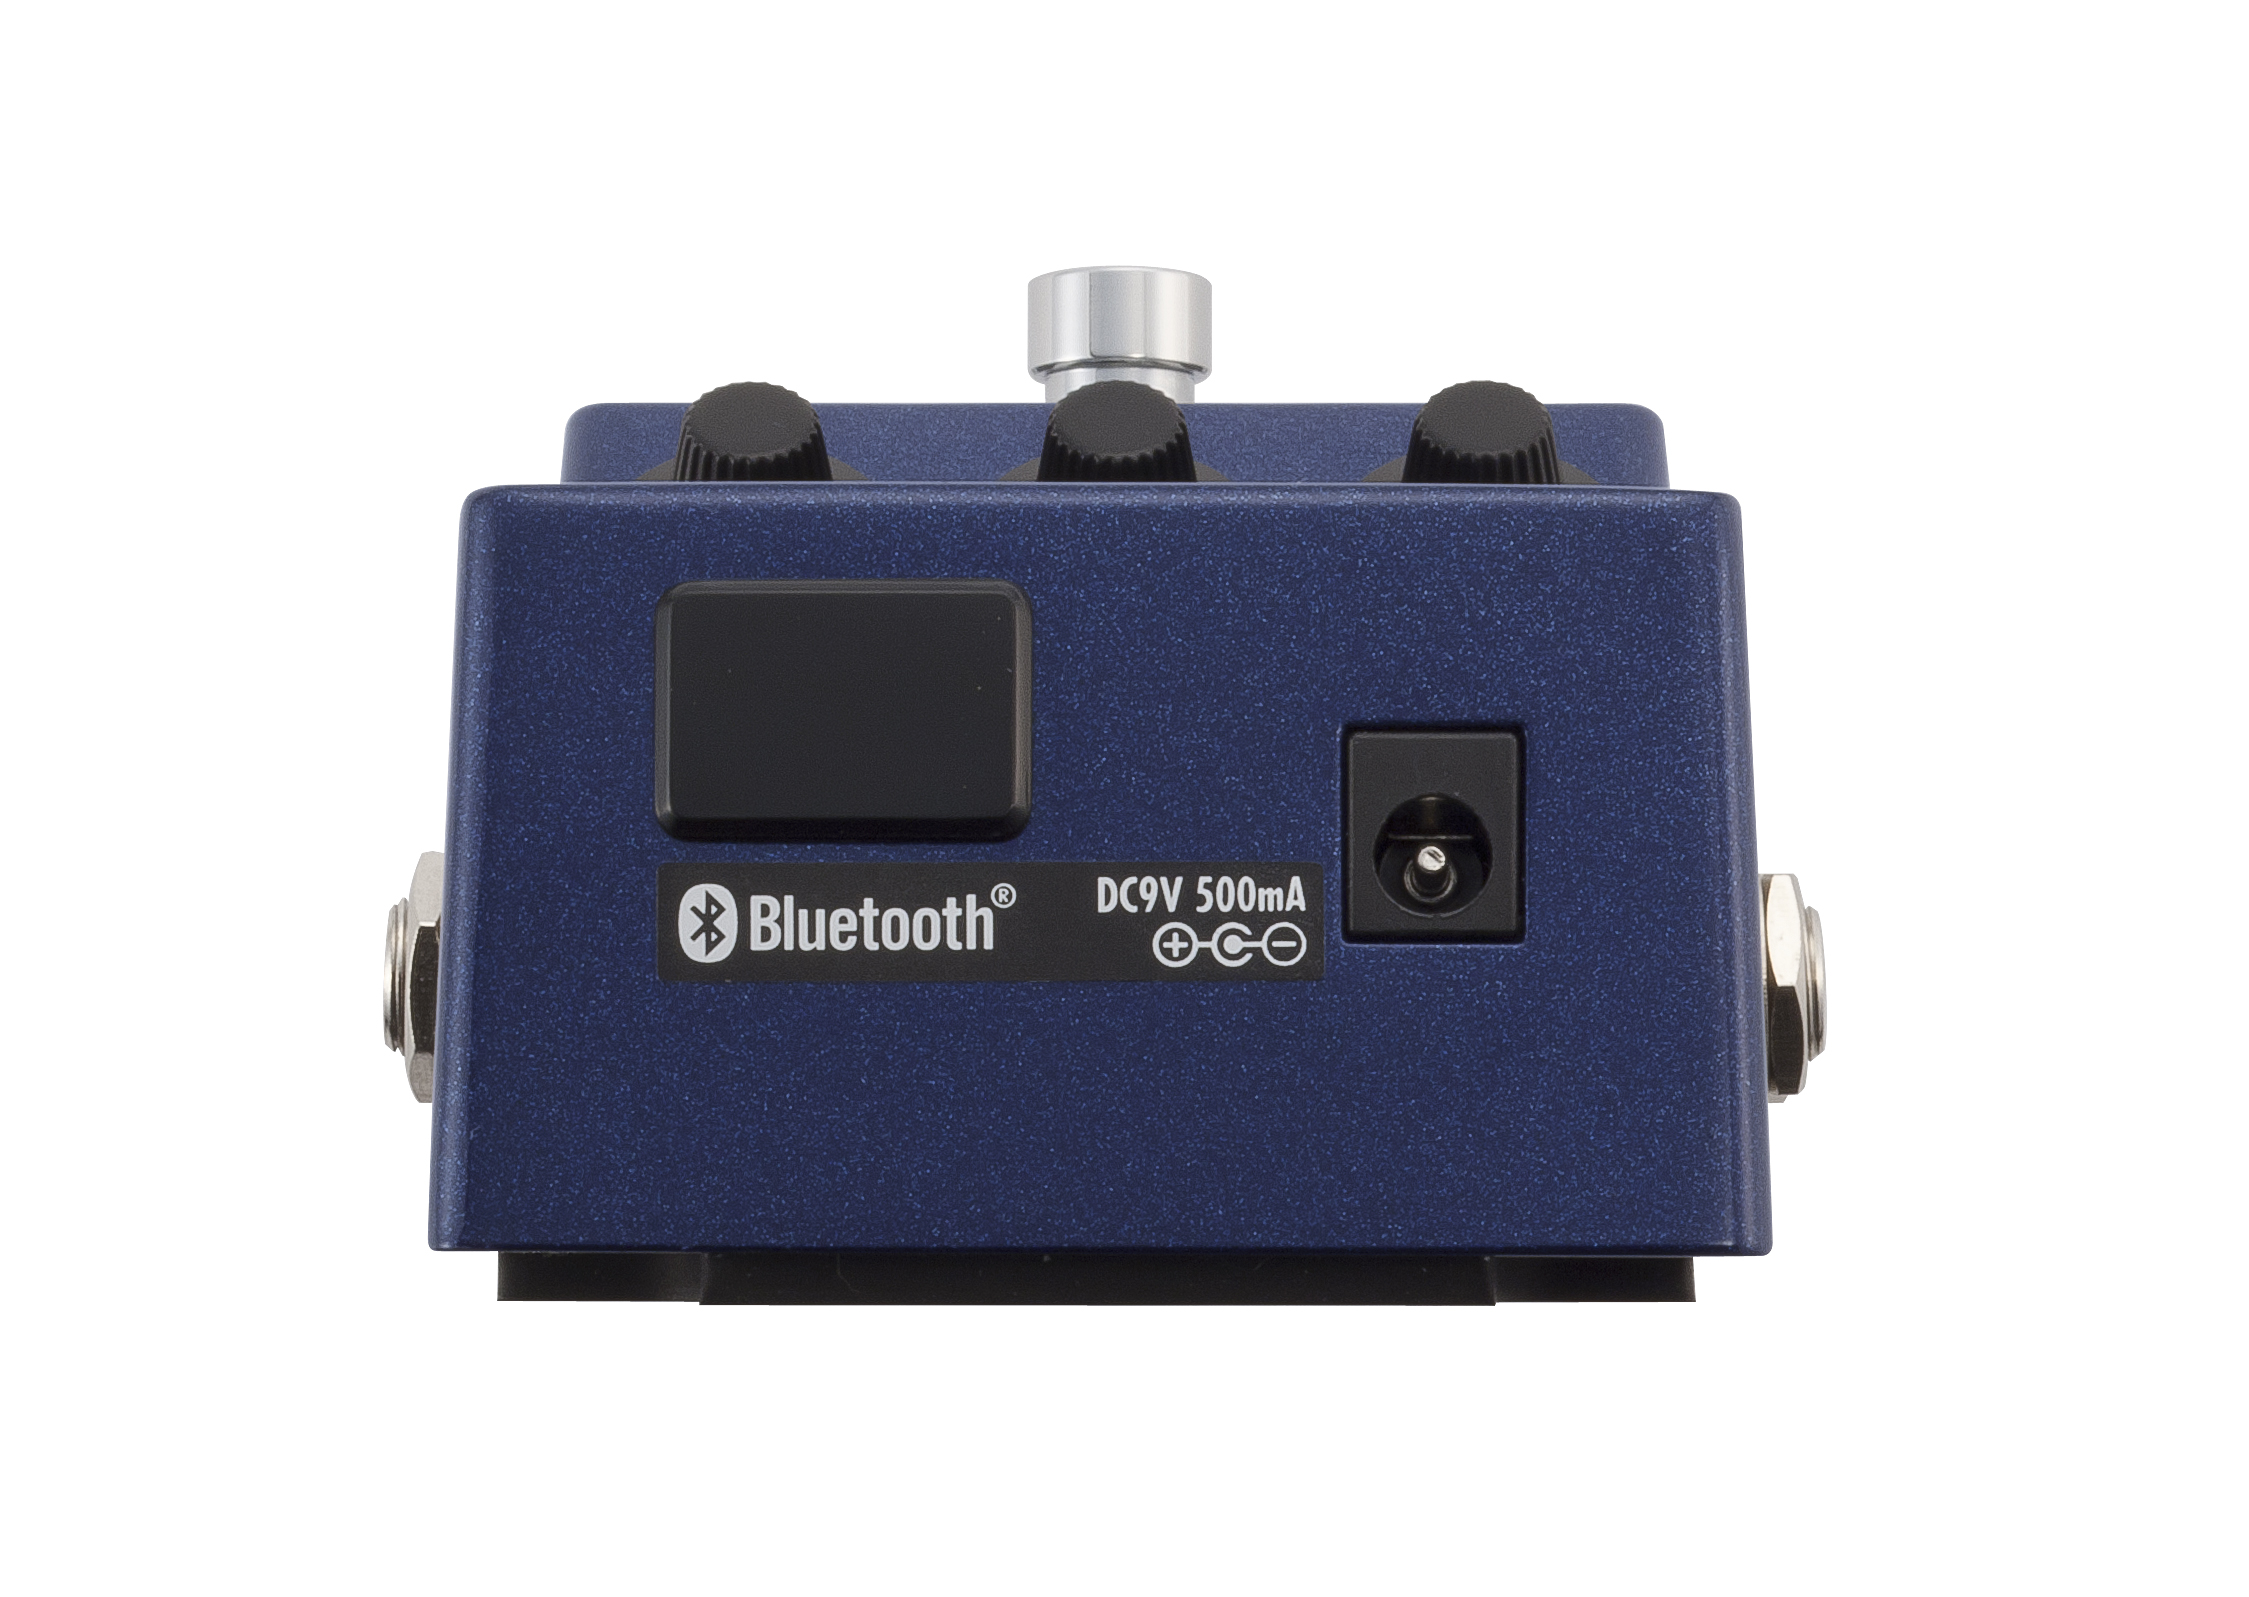 MS-100BT MultiStomp Guitar Pedal with Bluetooth | Zoom